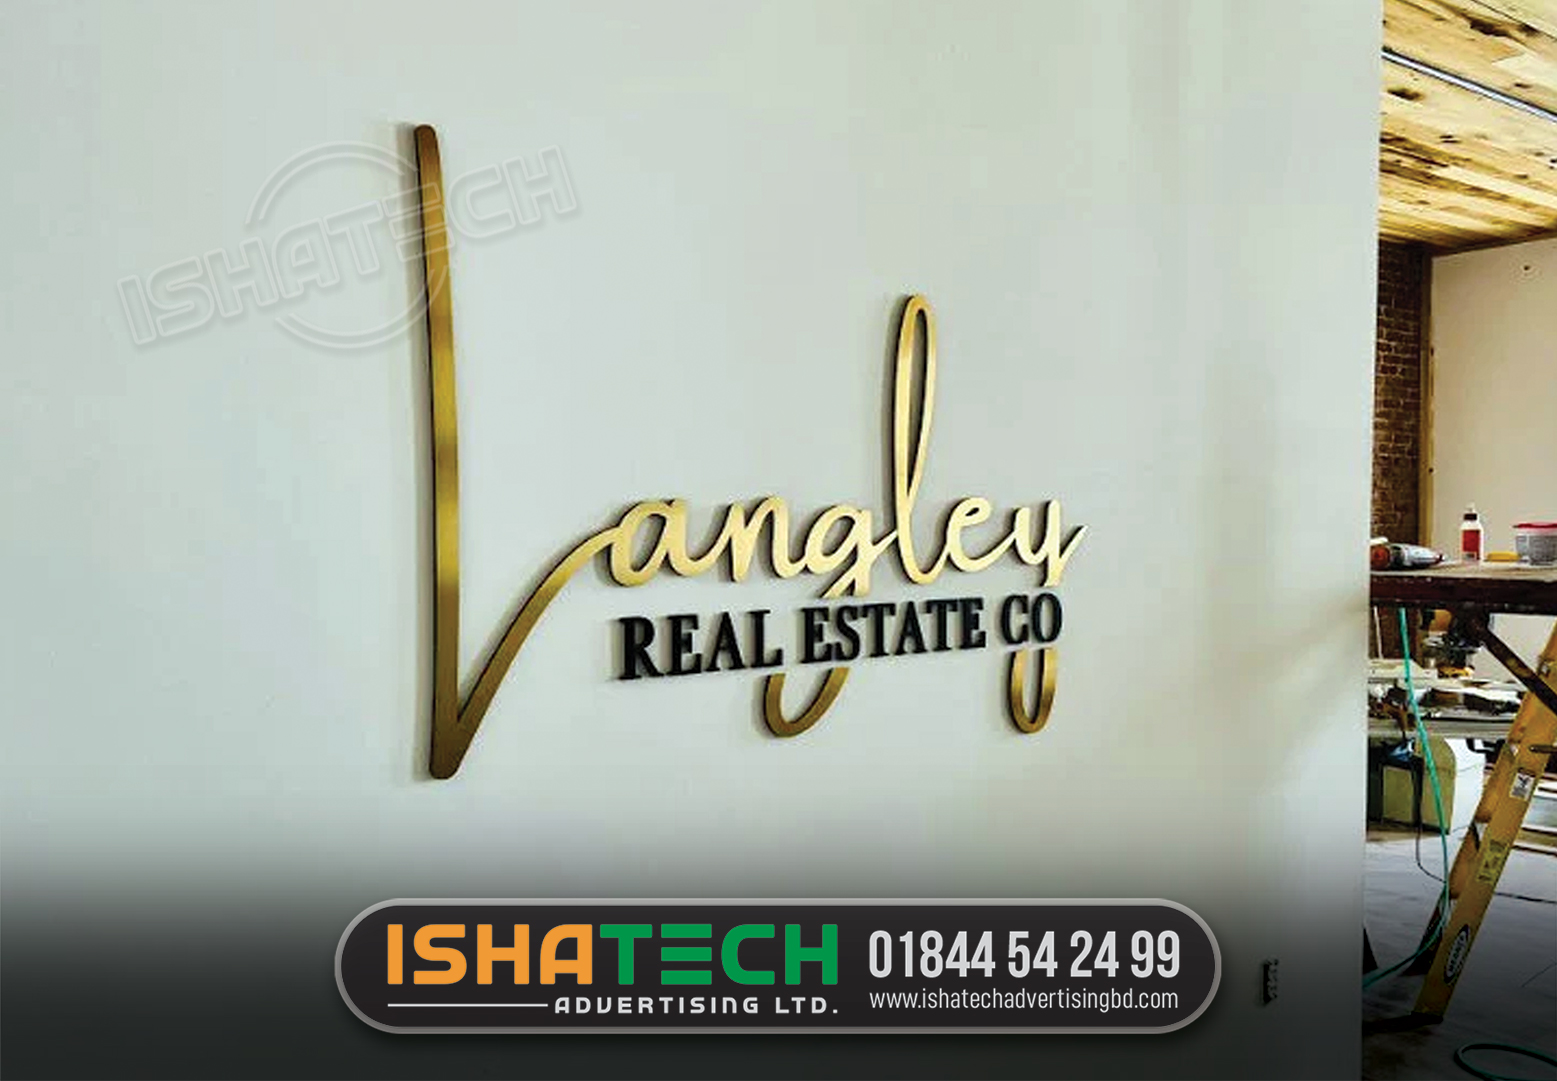 LANGLEY REAL ESTATE CO GOLDEN COLOR SS LETTER SIGNS MAKER AND SUPPLIER AGENCY IN DHAKA, CHITTAGONG BD